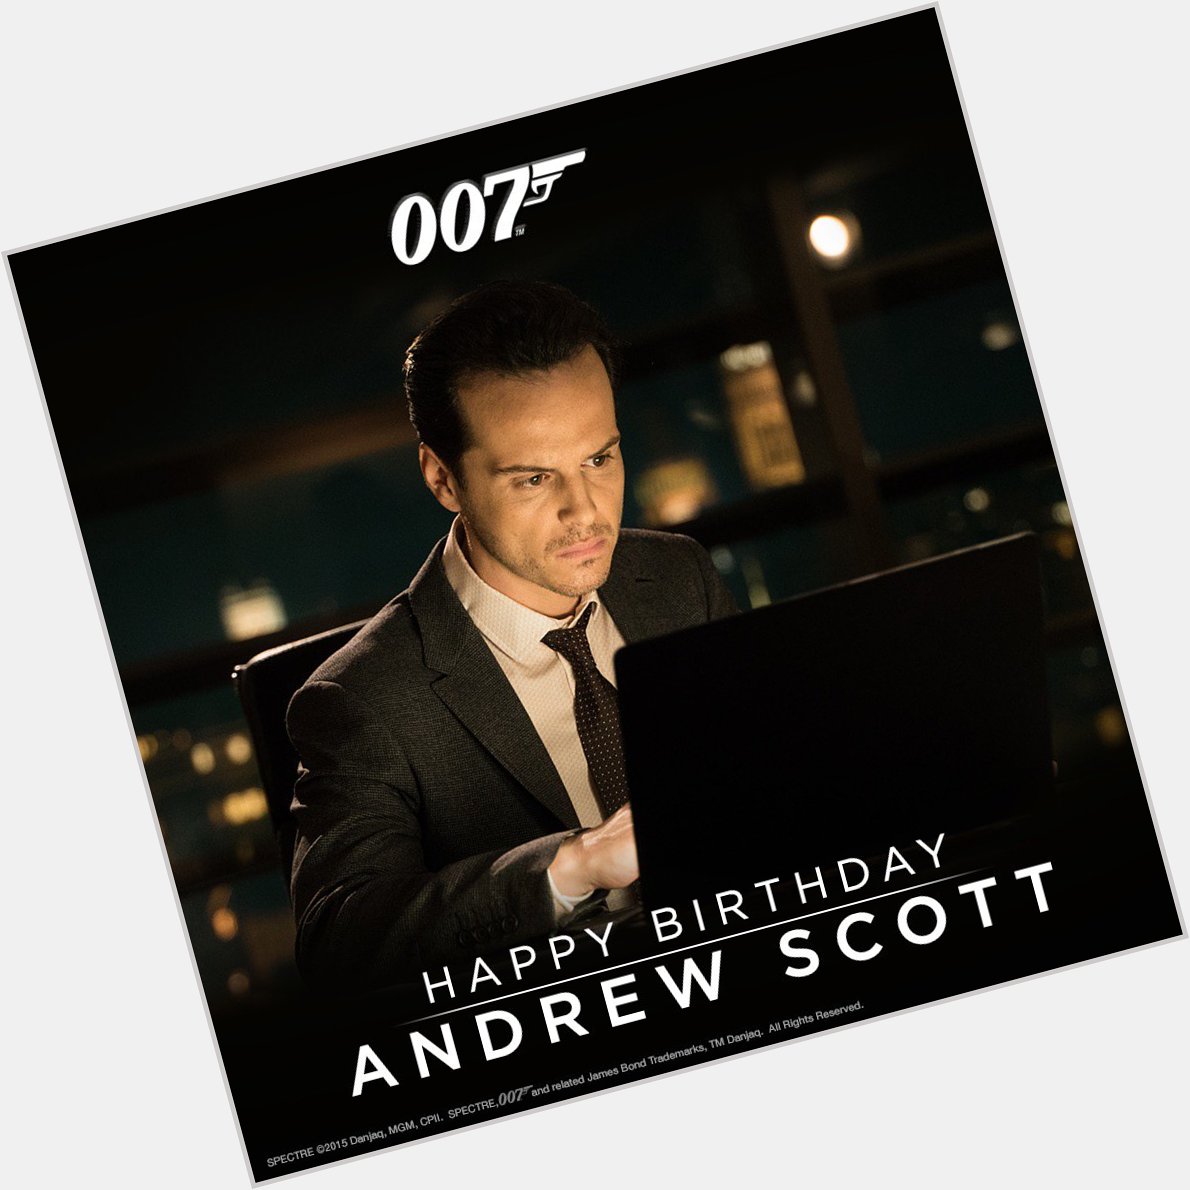 HAPPY \"BELATED\" BIRTHDAY TO ANDREW SCOTT...WHO PLAYED: MAX DENBIGH IN JAMES BOND 007: SPECTRE (2015). ST: (10/21/15) 